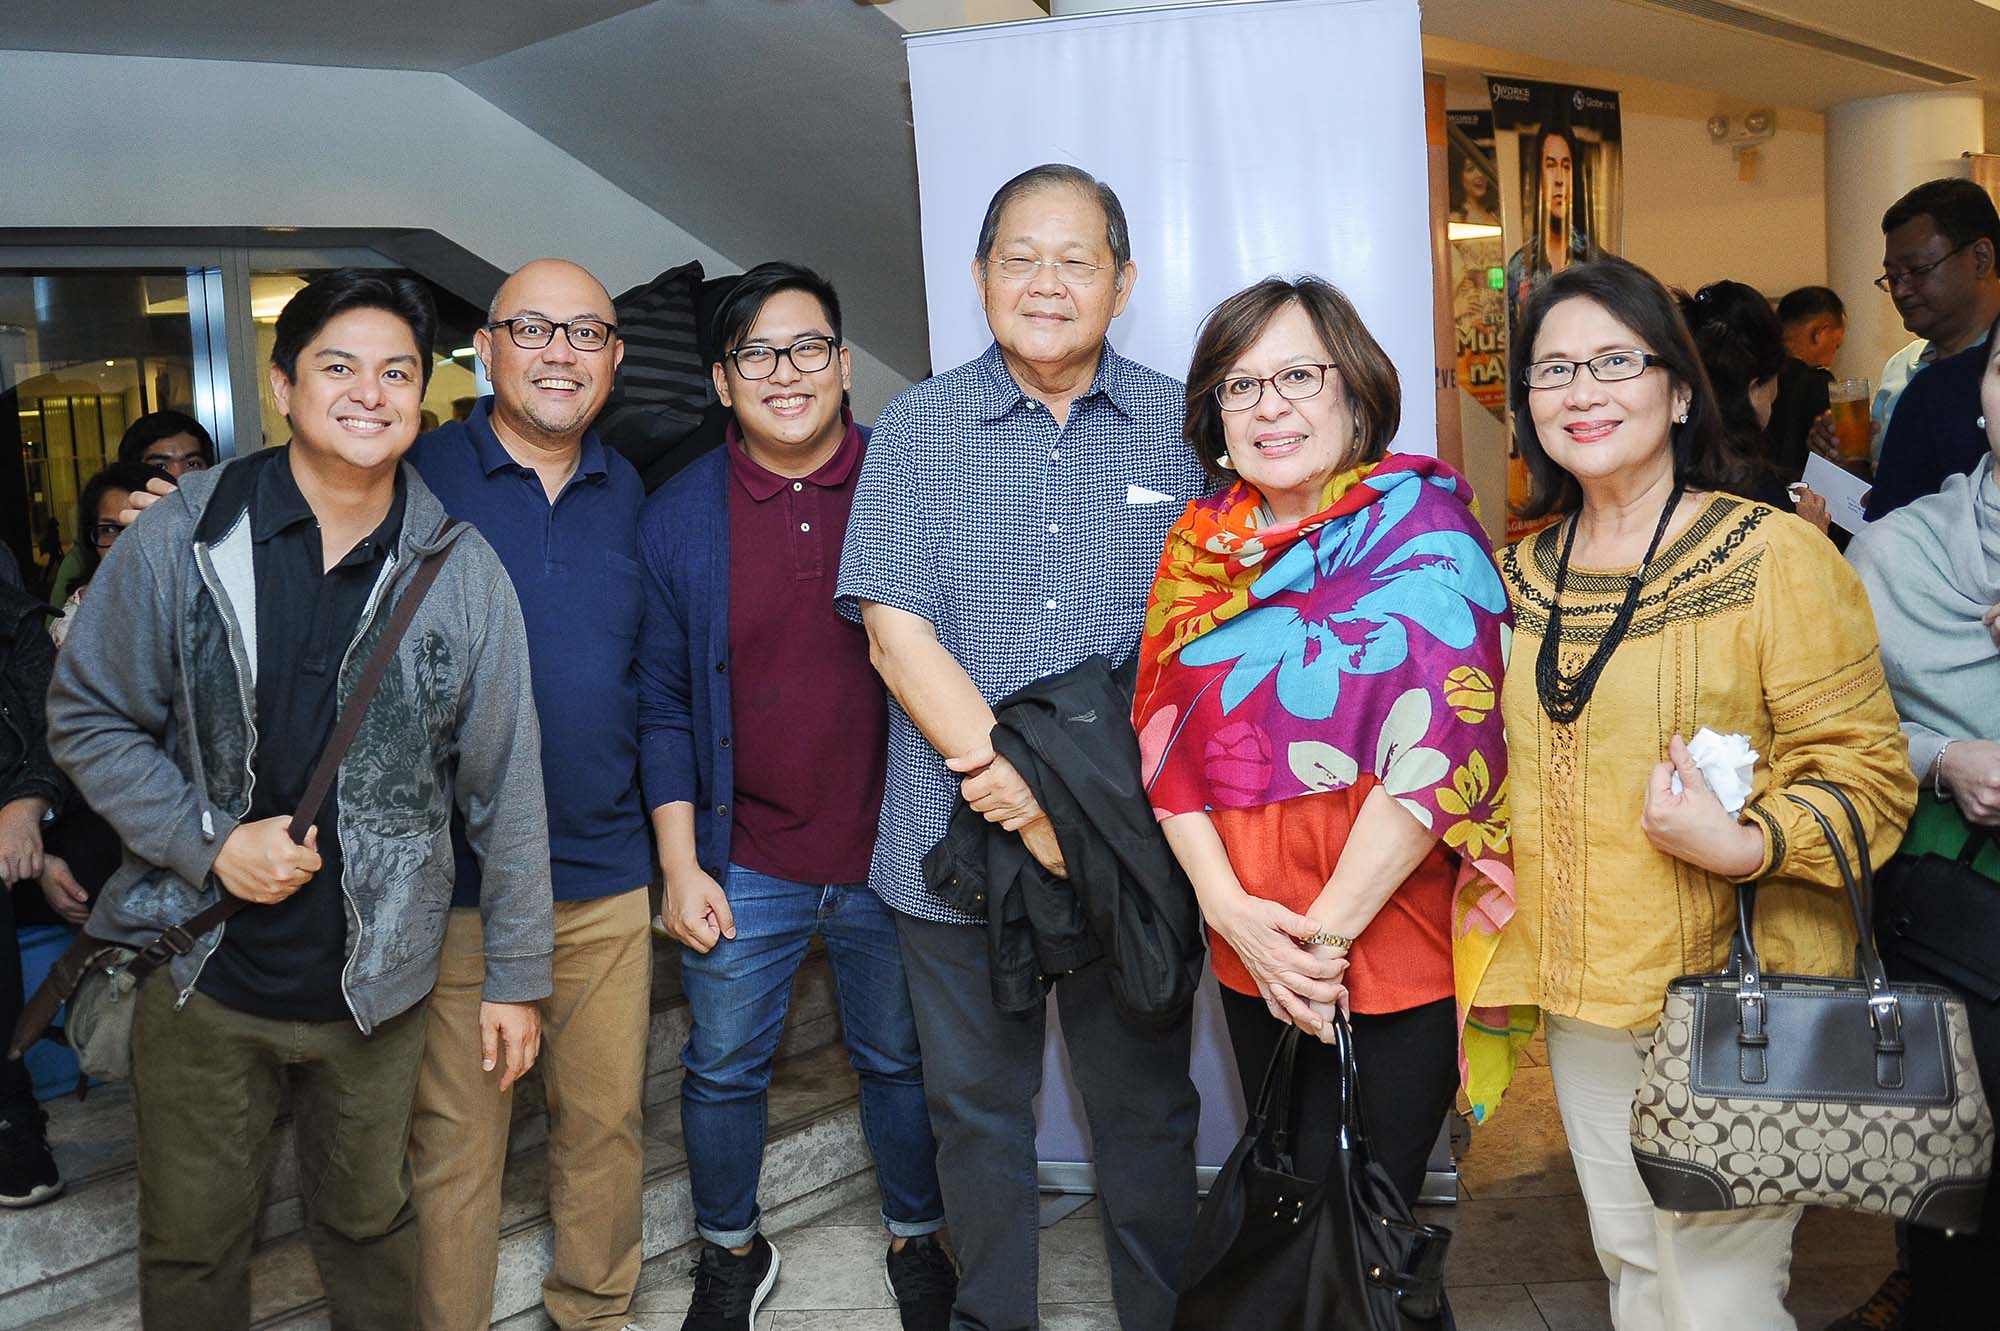 In Photo 3 From L to R: Allan Tuazon (Homecoming 2019 Chair), Edric Hernandez (MBM 1999) and guest, Prof. Jun Borromeo (MM 1977) and Wife, Ms. Coratec Jimenez (MDM 2002)